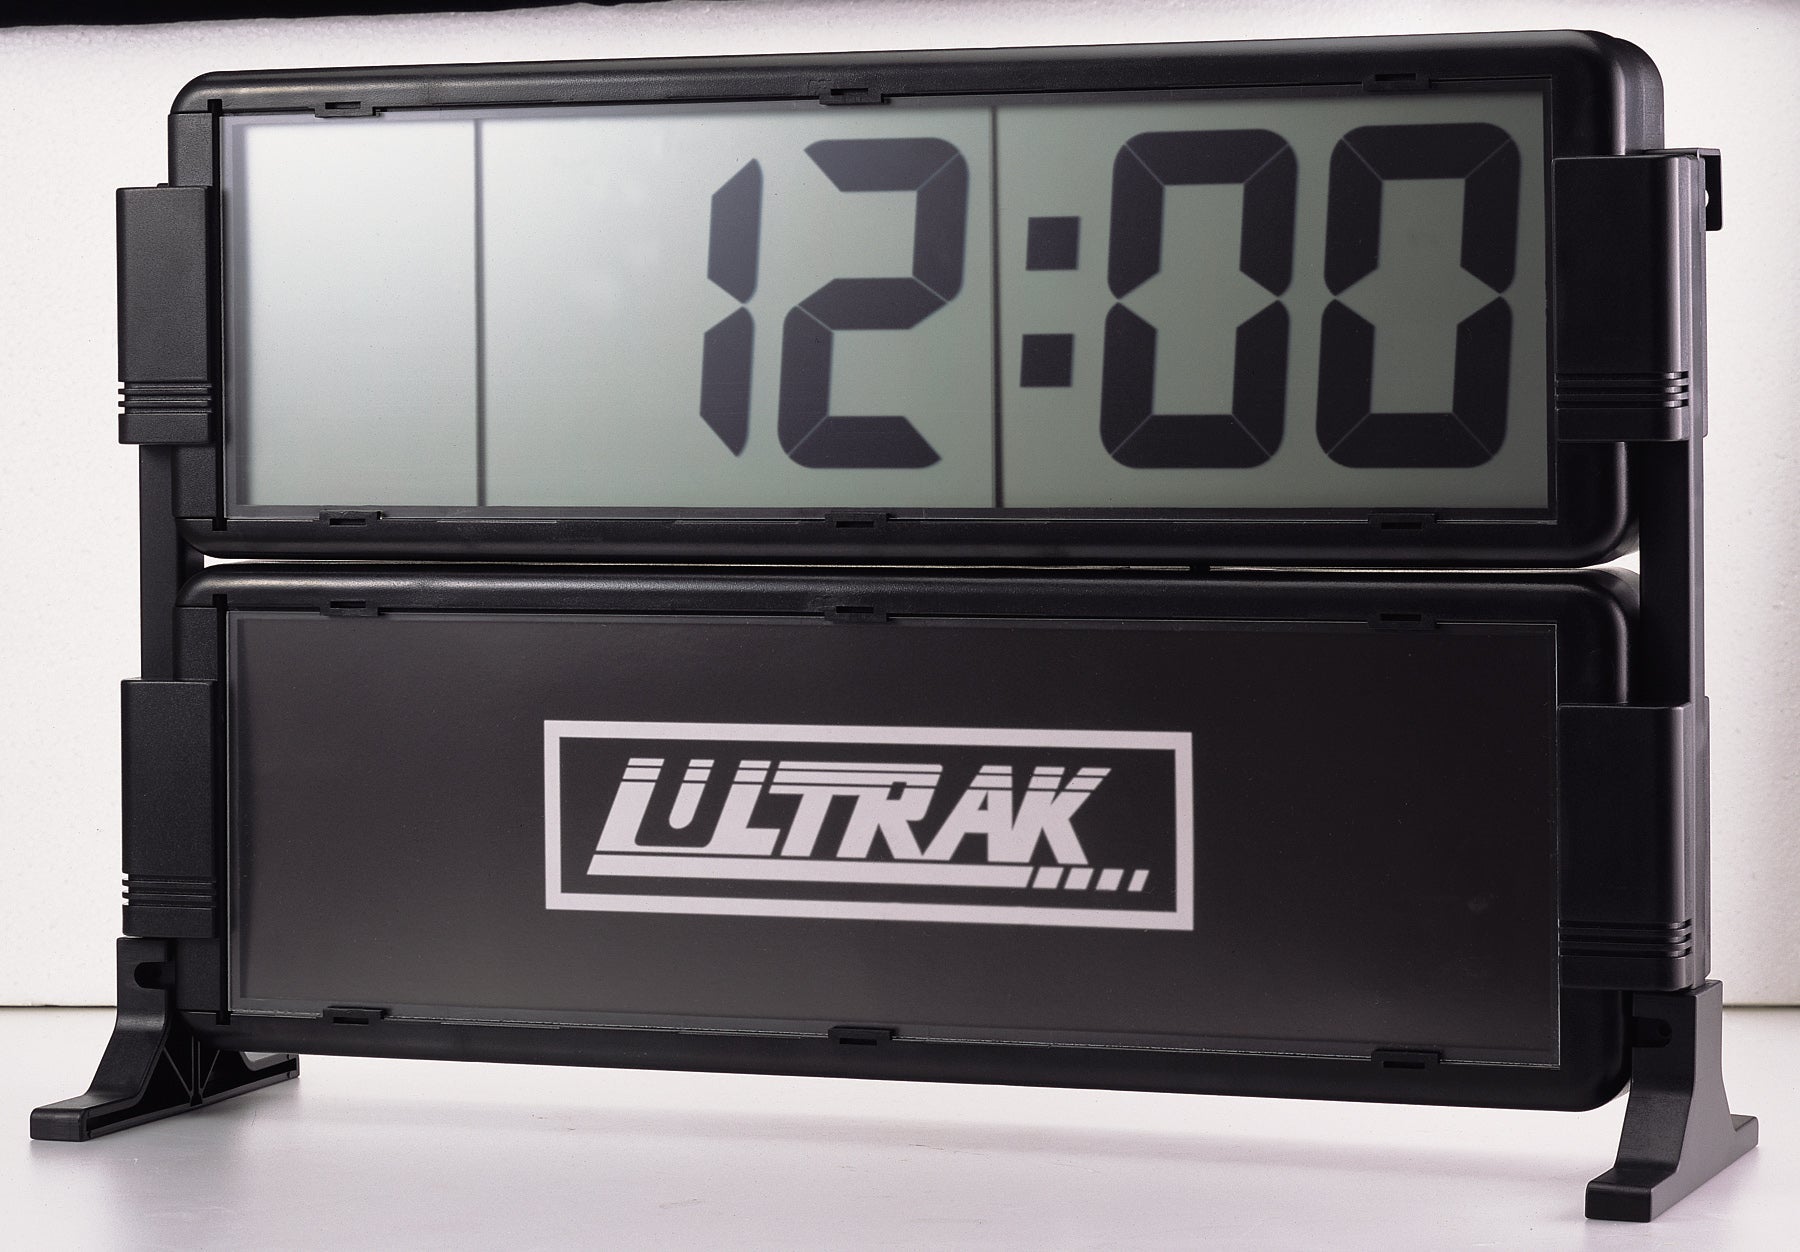 ULTRAK T-100 - Display Timer with 4 inch LCD Digits